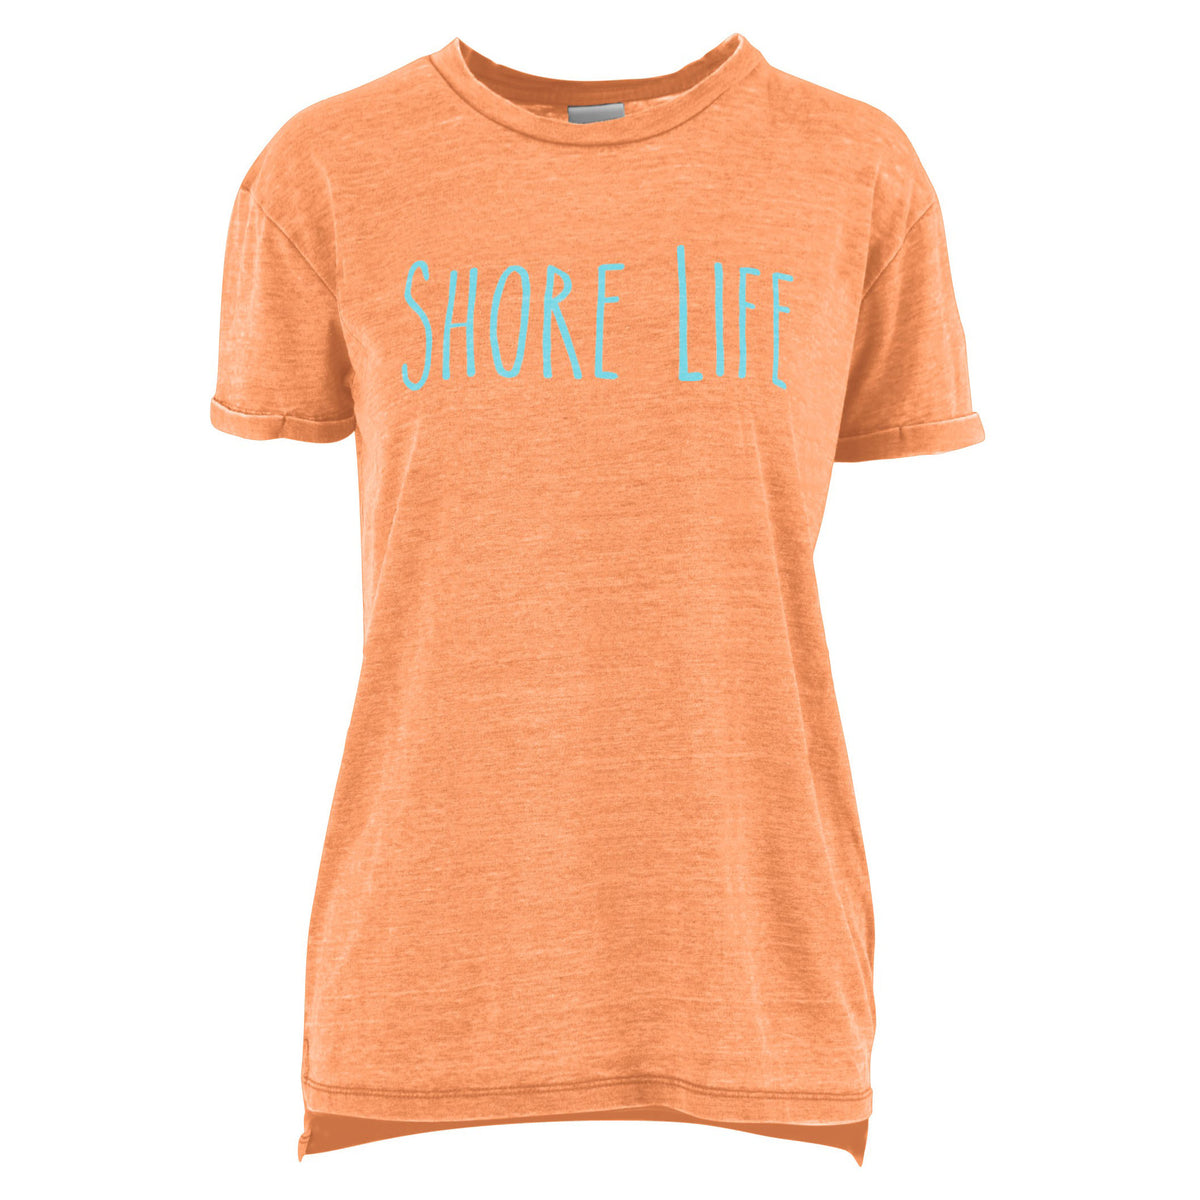 Shore Life Vintage Washed Tee